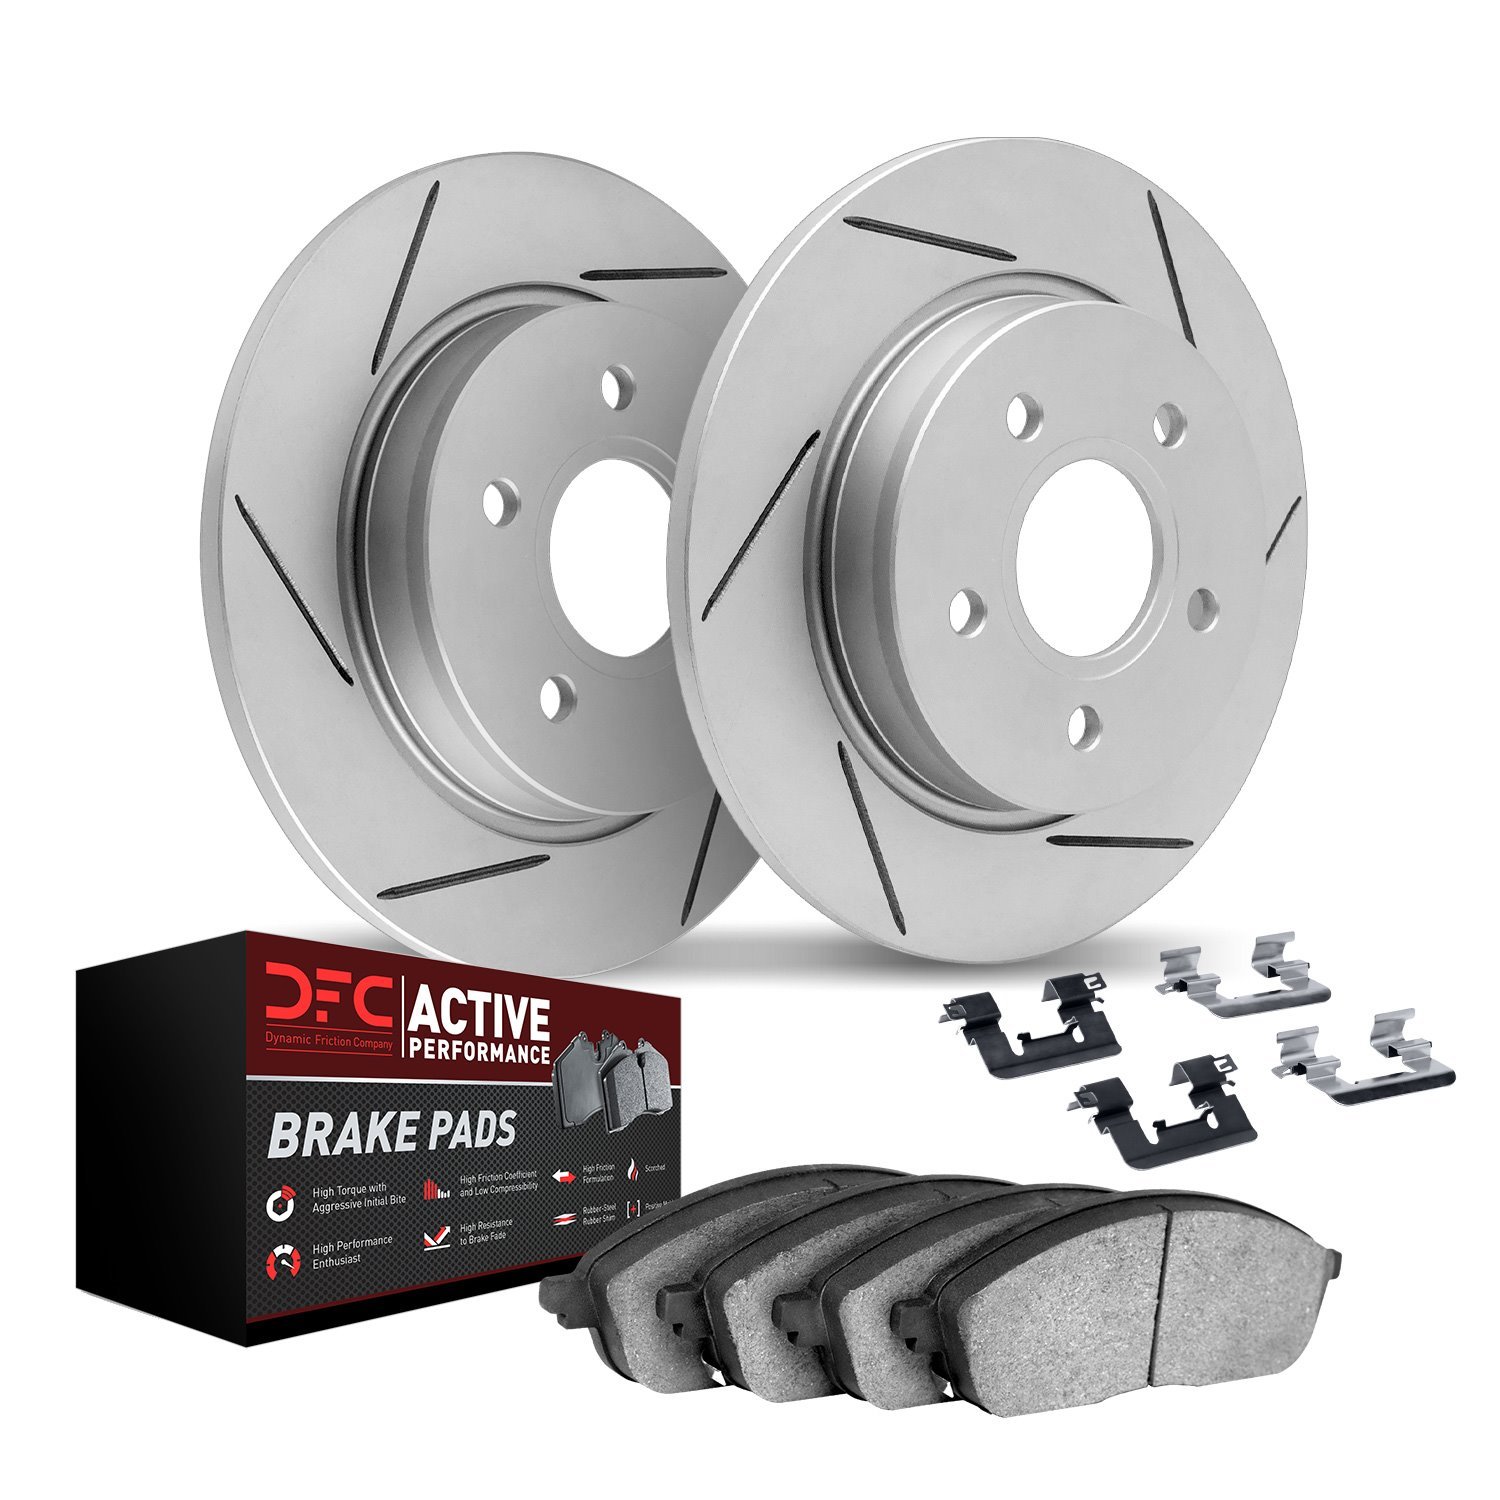 2712-59084 Geoperformance Slotted Brake Rotors with Active Performance Pads Kits & Hardware, 2011-2015 Acura/Honda, Position: Re